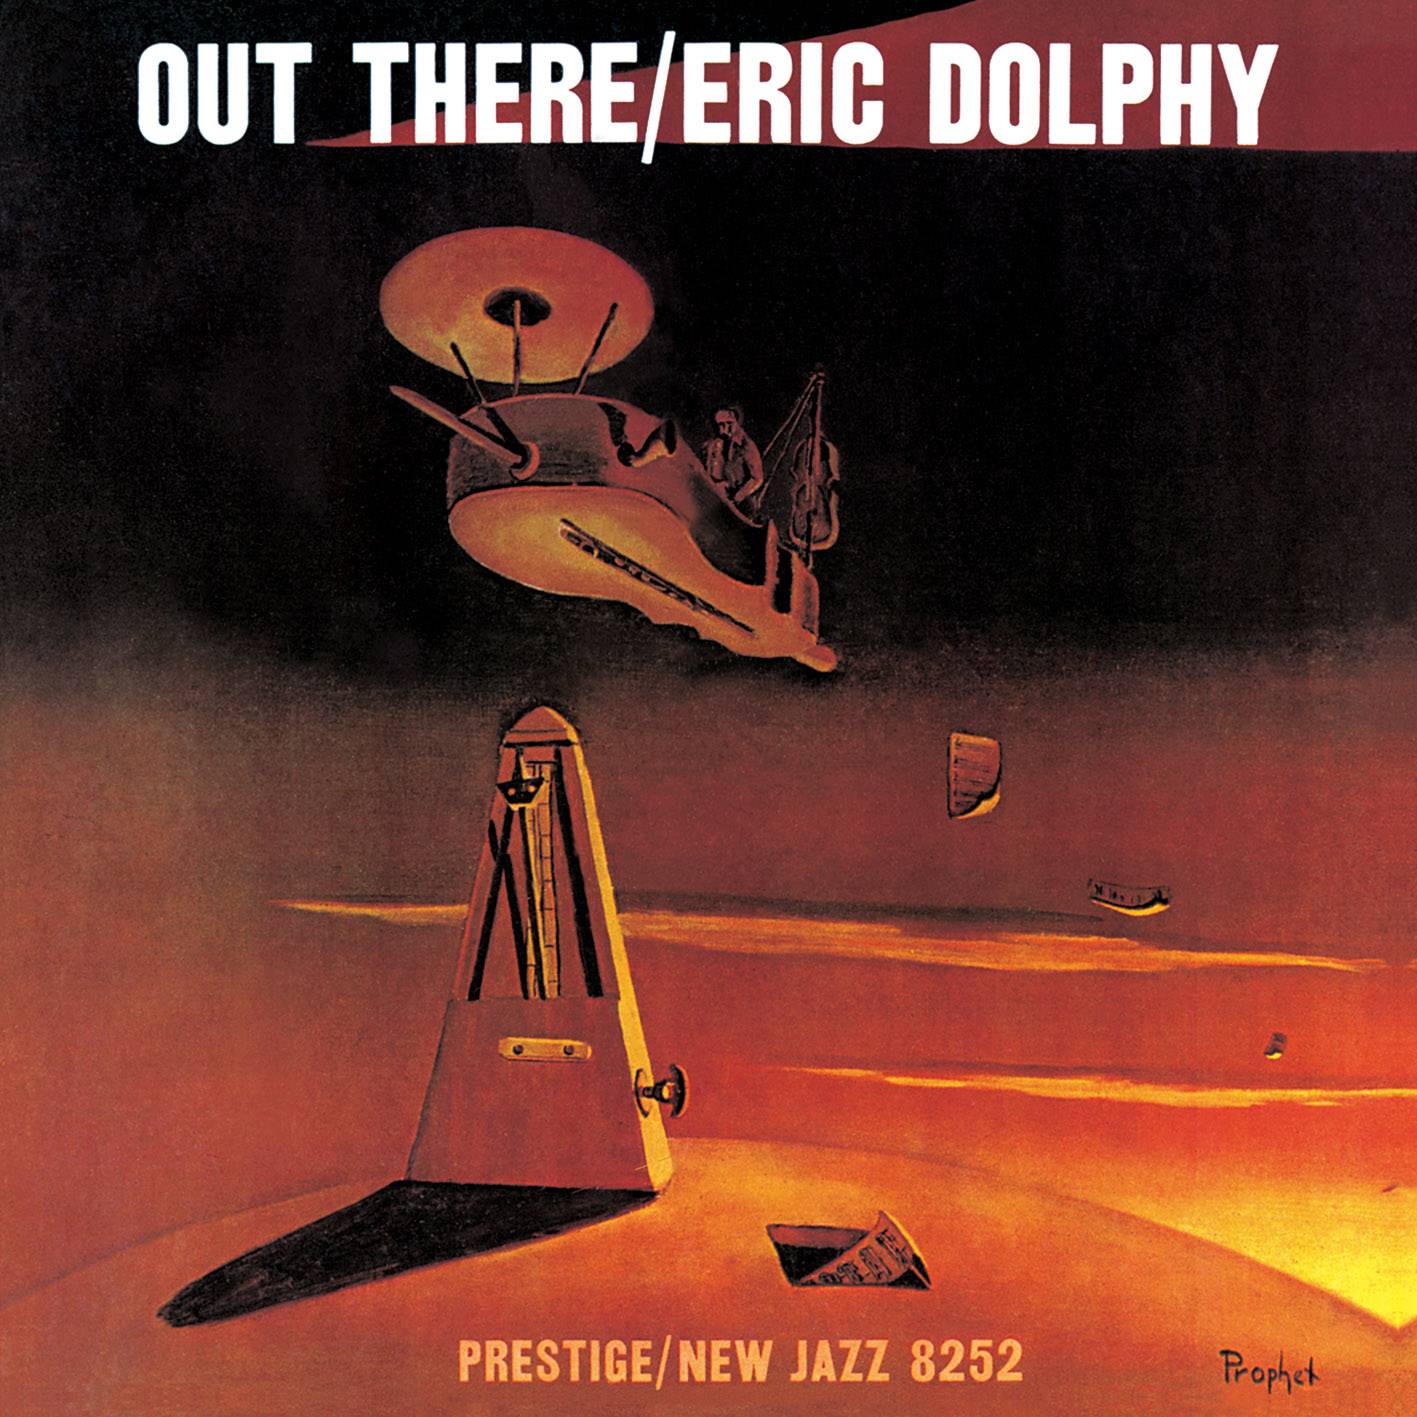 Eric Dolphy - Out There (1960) [Analogue Productions 2018] SACD ISO + DSF DSD64 + FLAC 24bit/96kHz